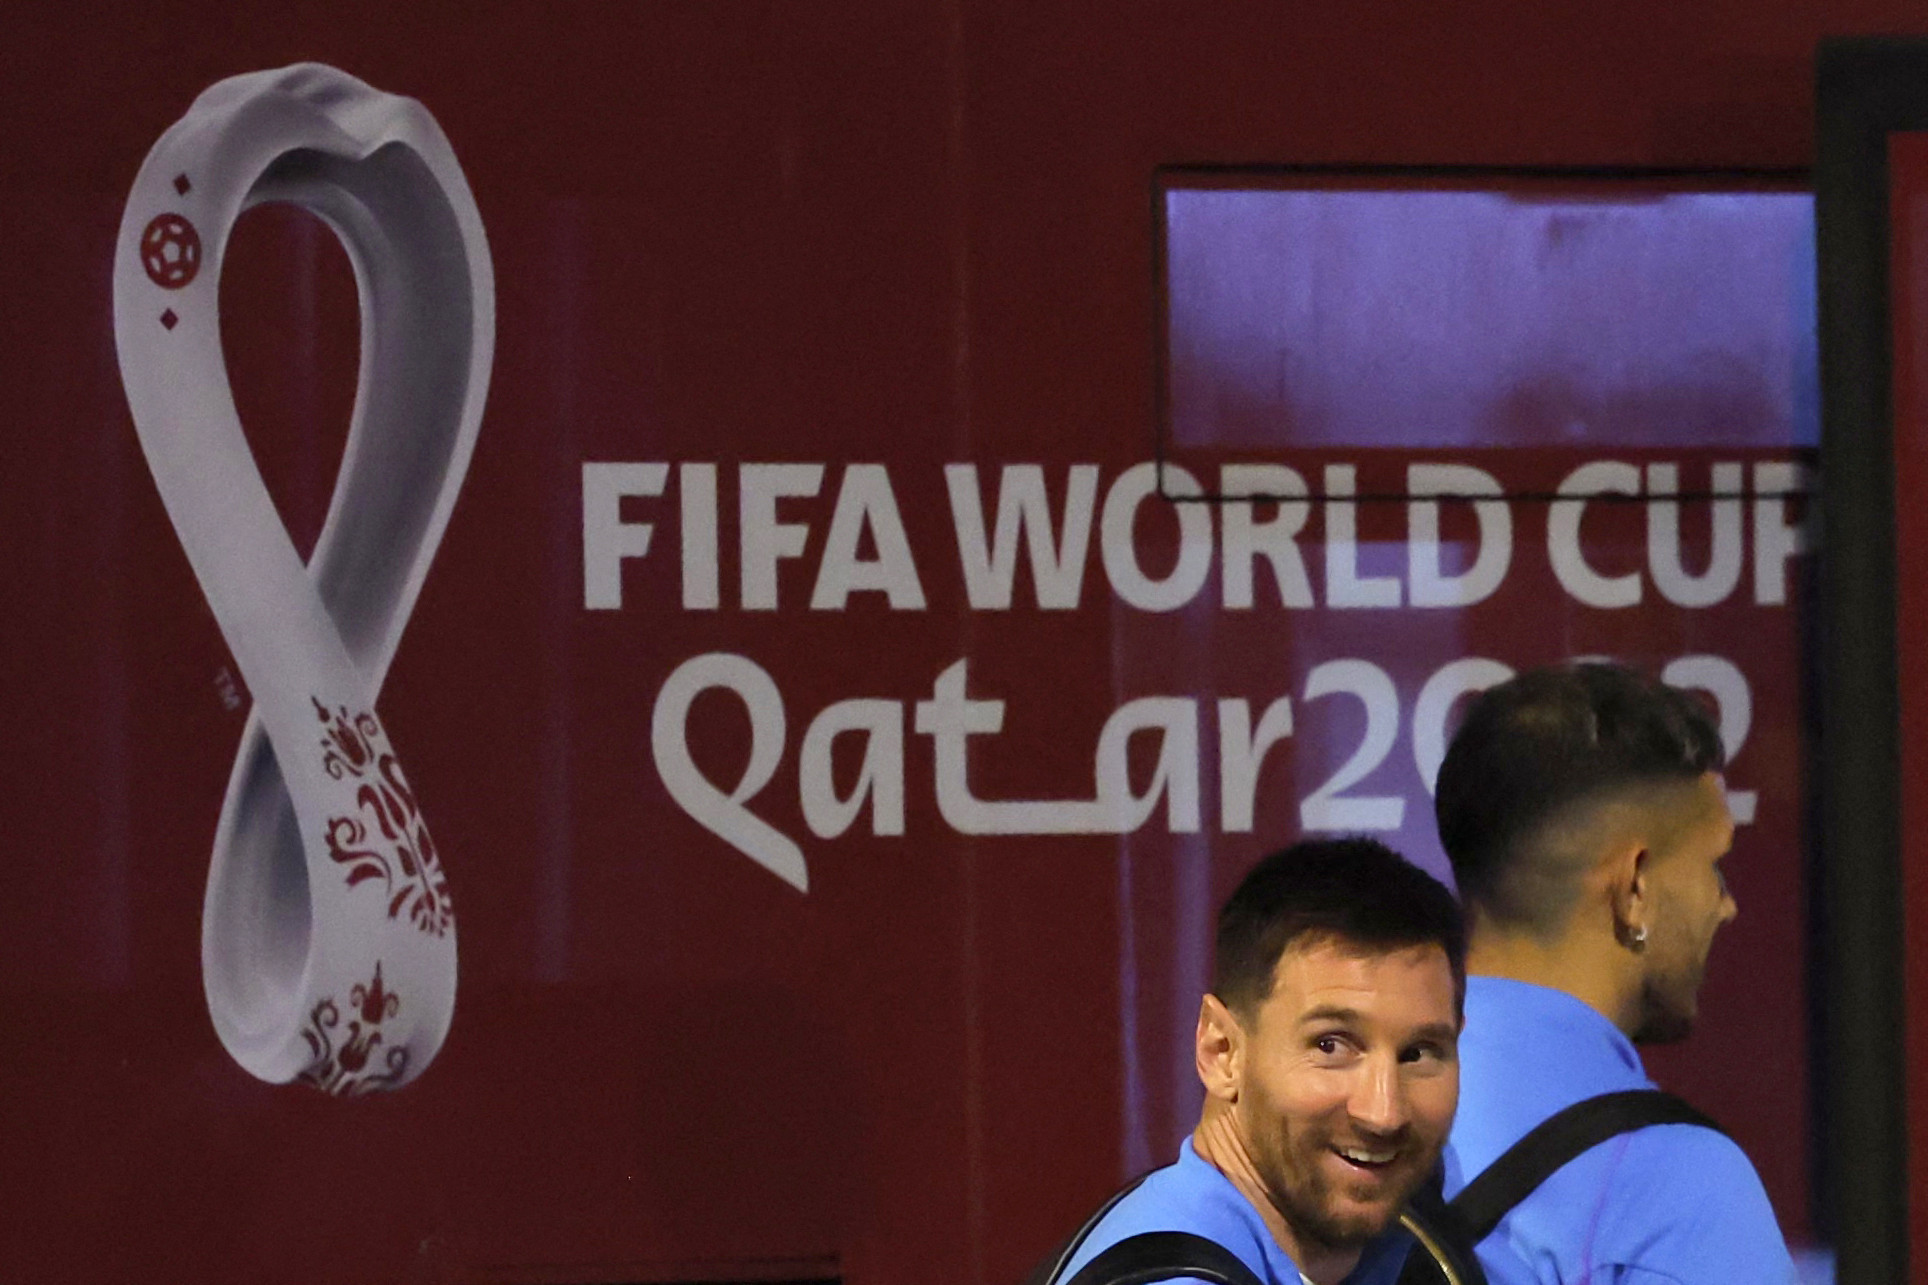 Last chance saloon for Messi at FIFA World Cup in Qatar as Argentina among favourites